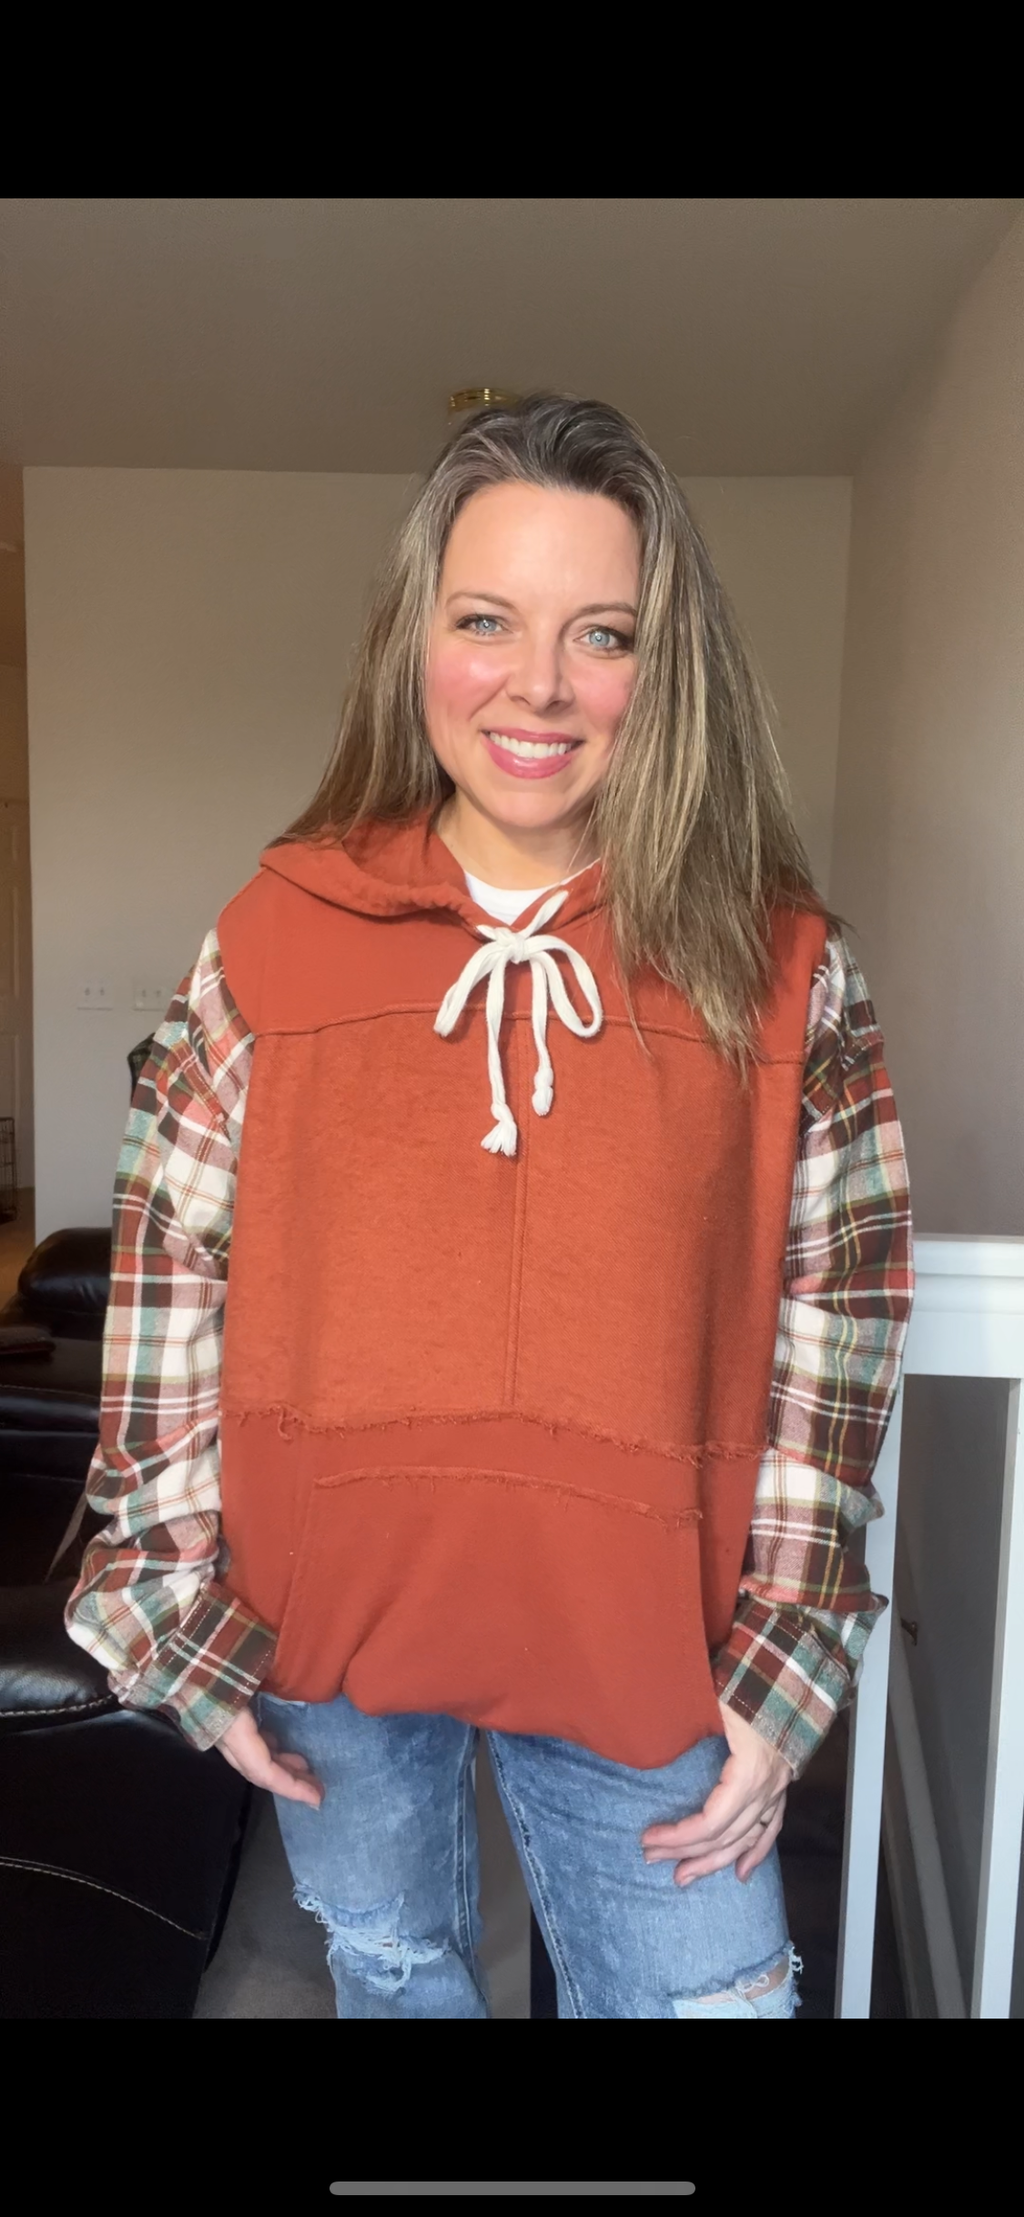 Upcycled Plain orange – women’s XL/1X – midweight sweatshirt with flannel sleeves￼